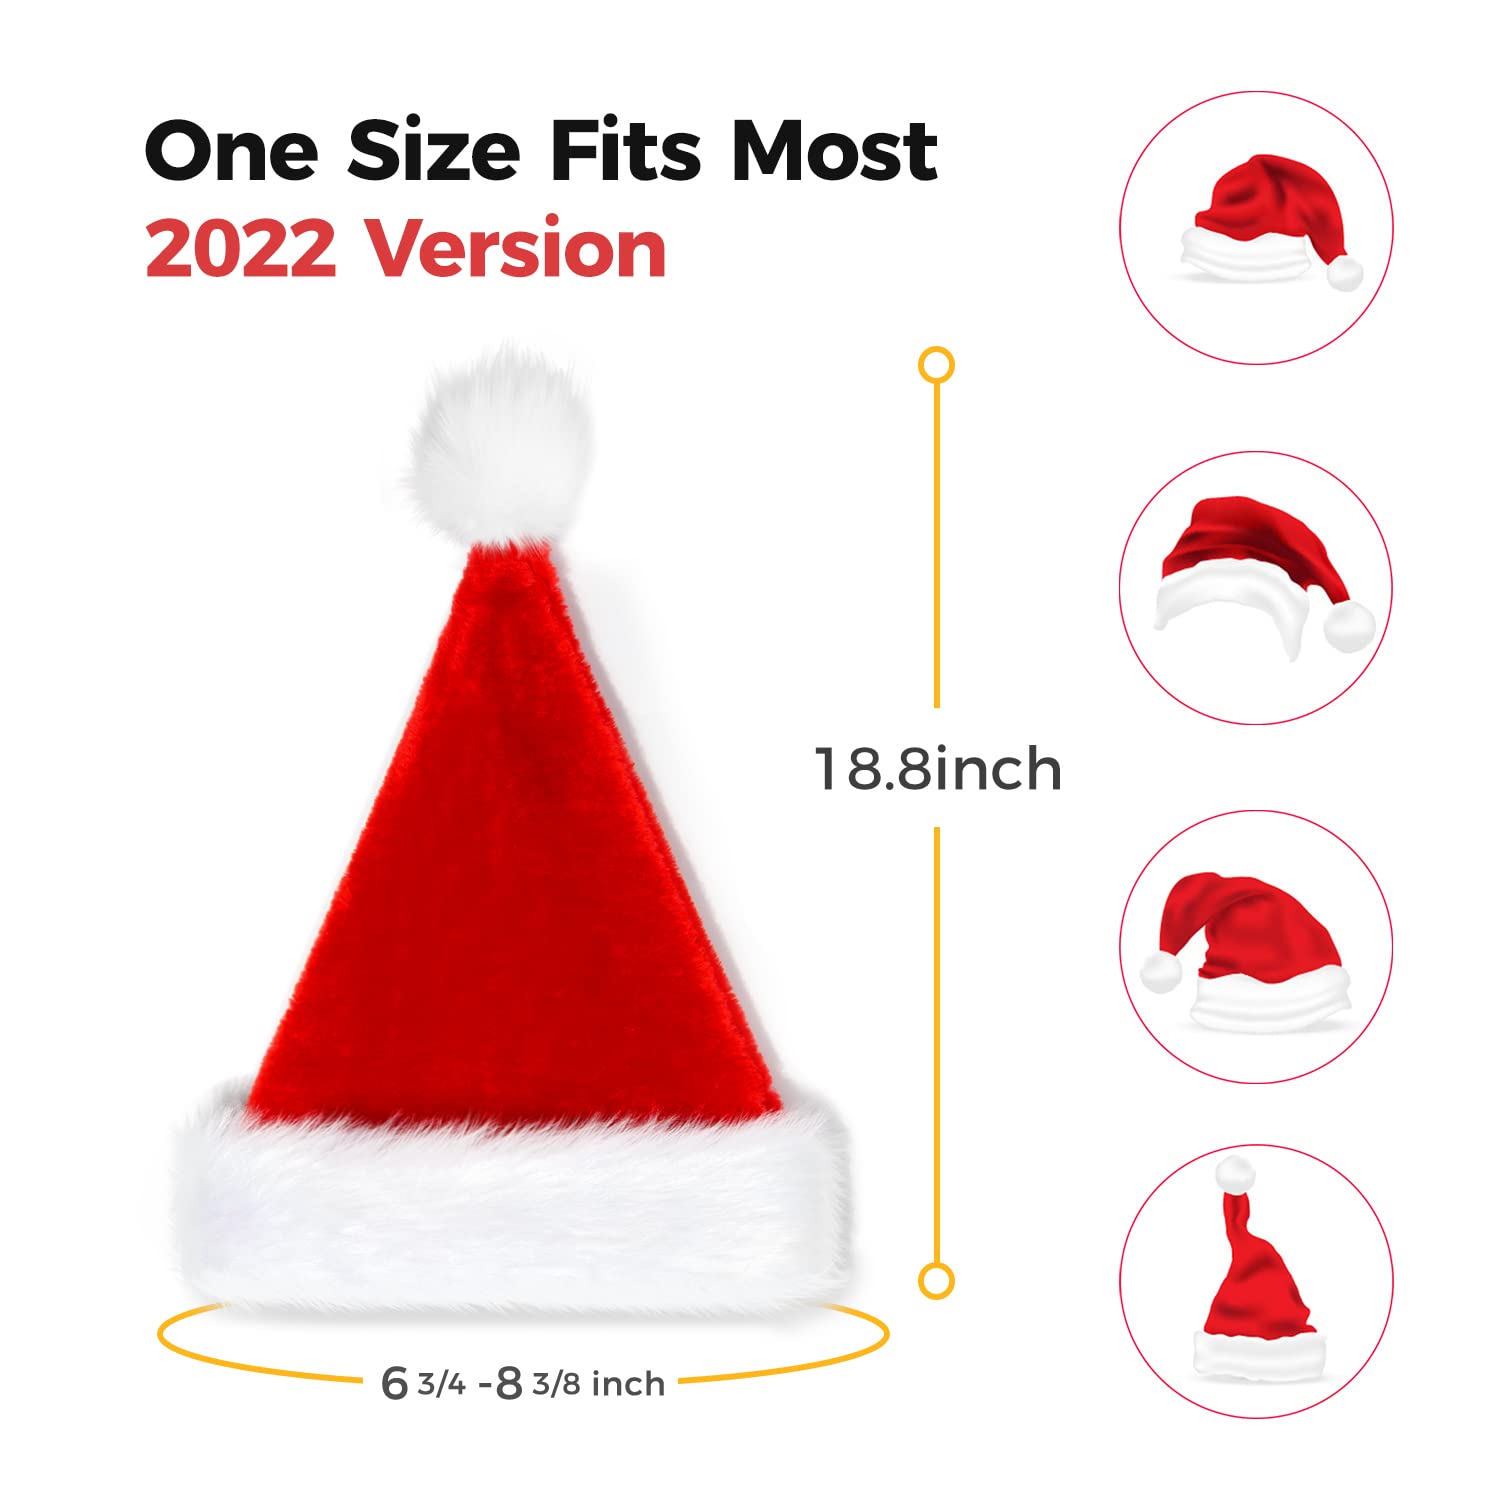 eCraftIndia Red and White Velvet Classic Fur Merry Christmas Hats, Santa Claus Caps for kids and Adults - XMAS Caps, Santa Hats for Christmas, New Year, Festive Holiday Party Celebration (Set of 24) 7